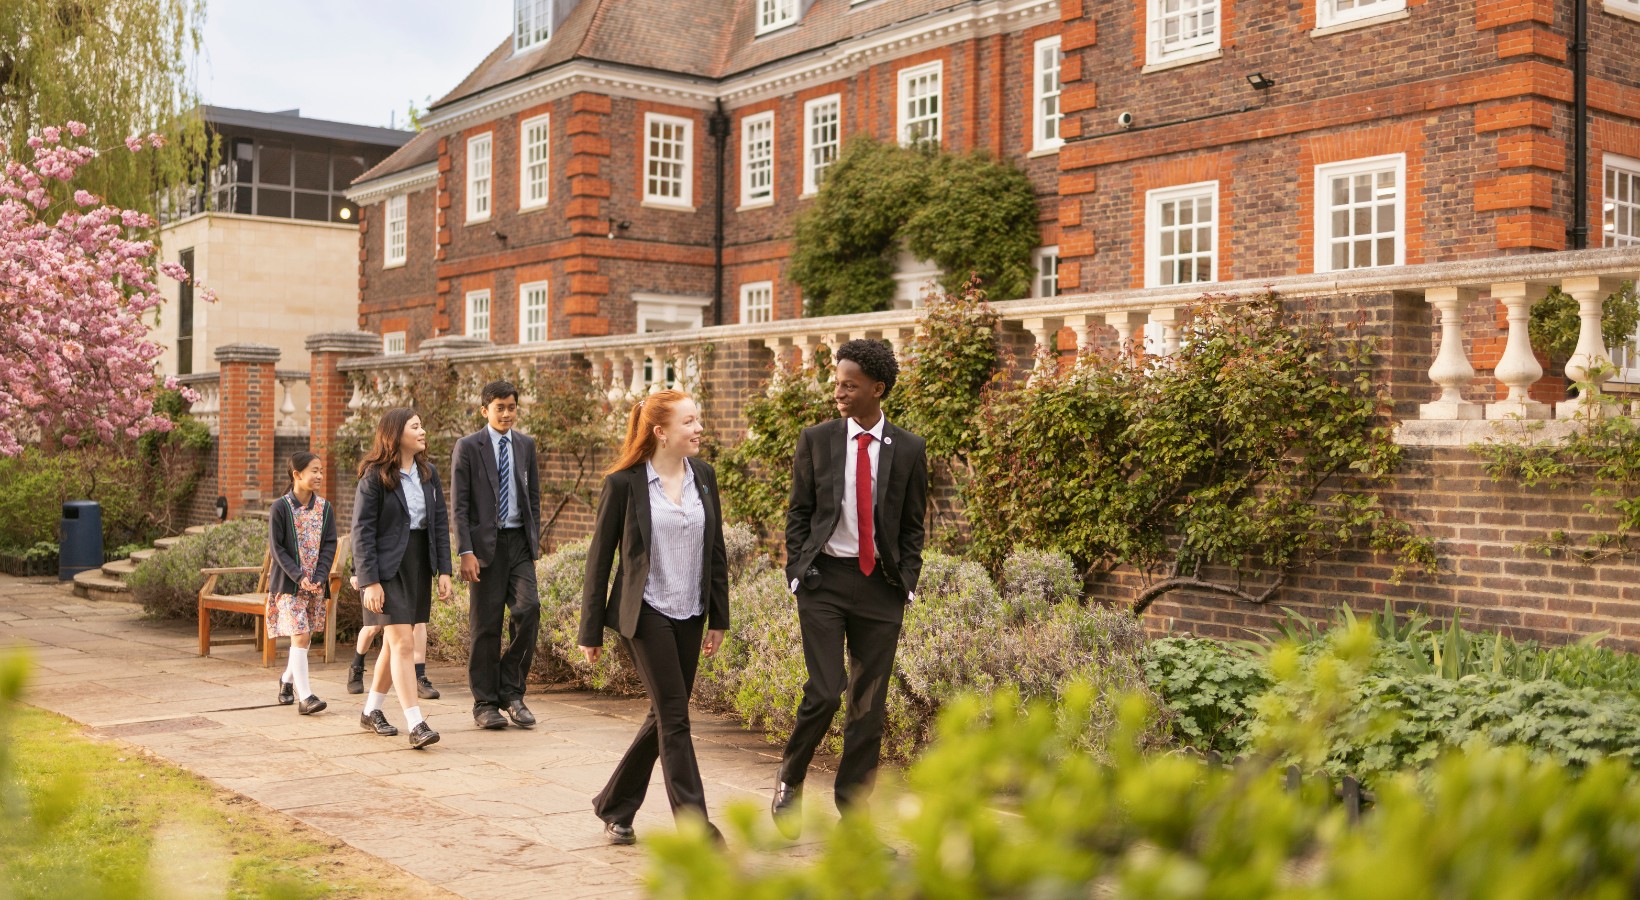 Senior pupils walking in the campus of Ibstock Place School, a private school near Richmond.